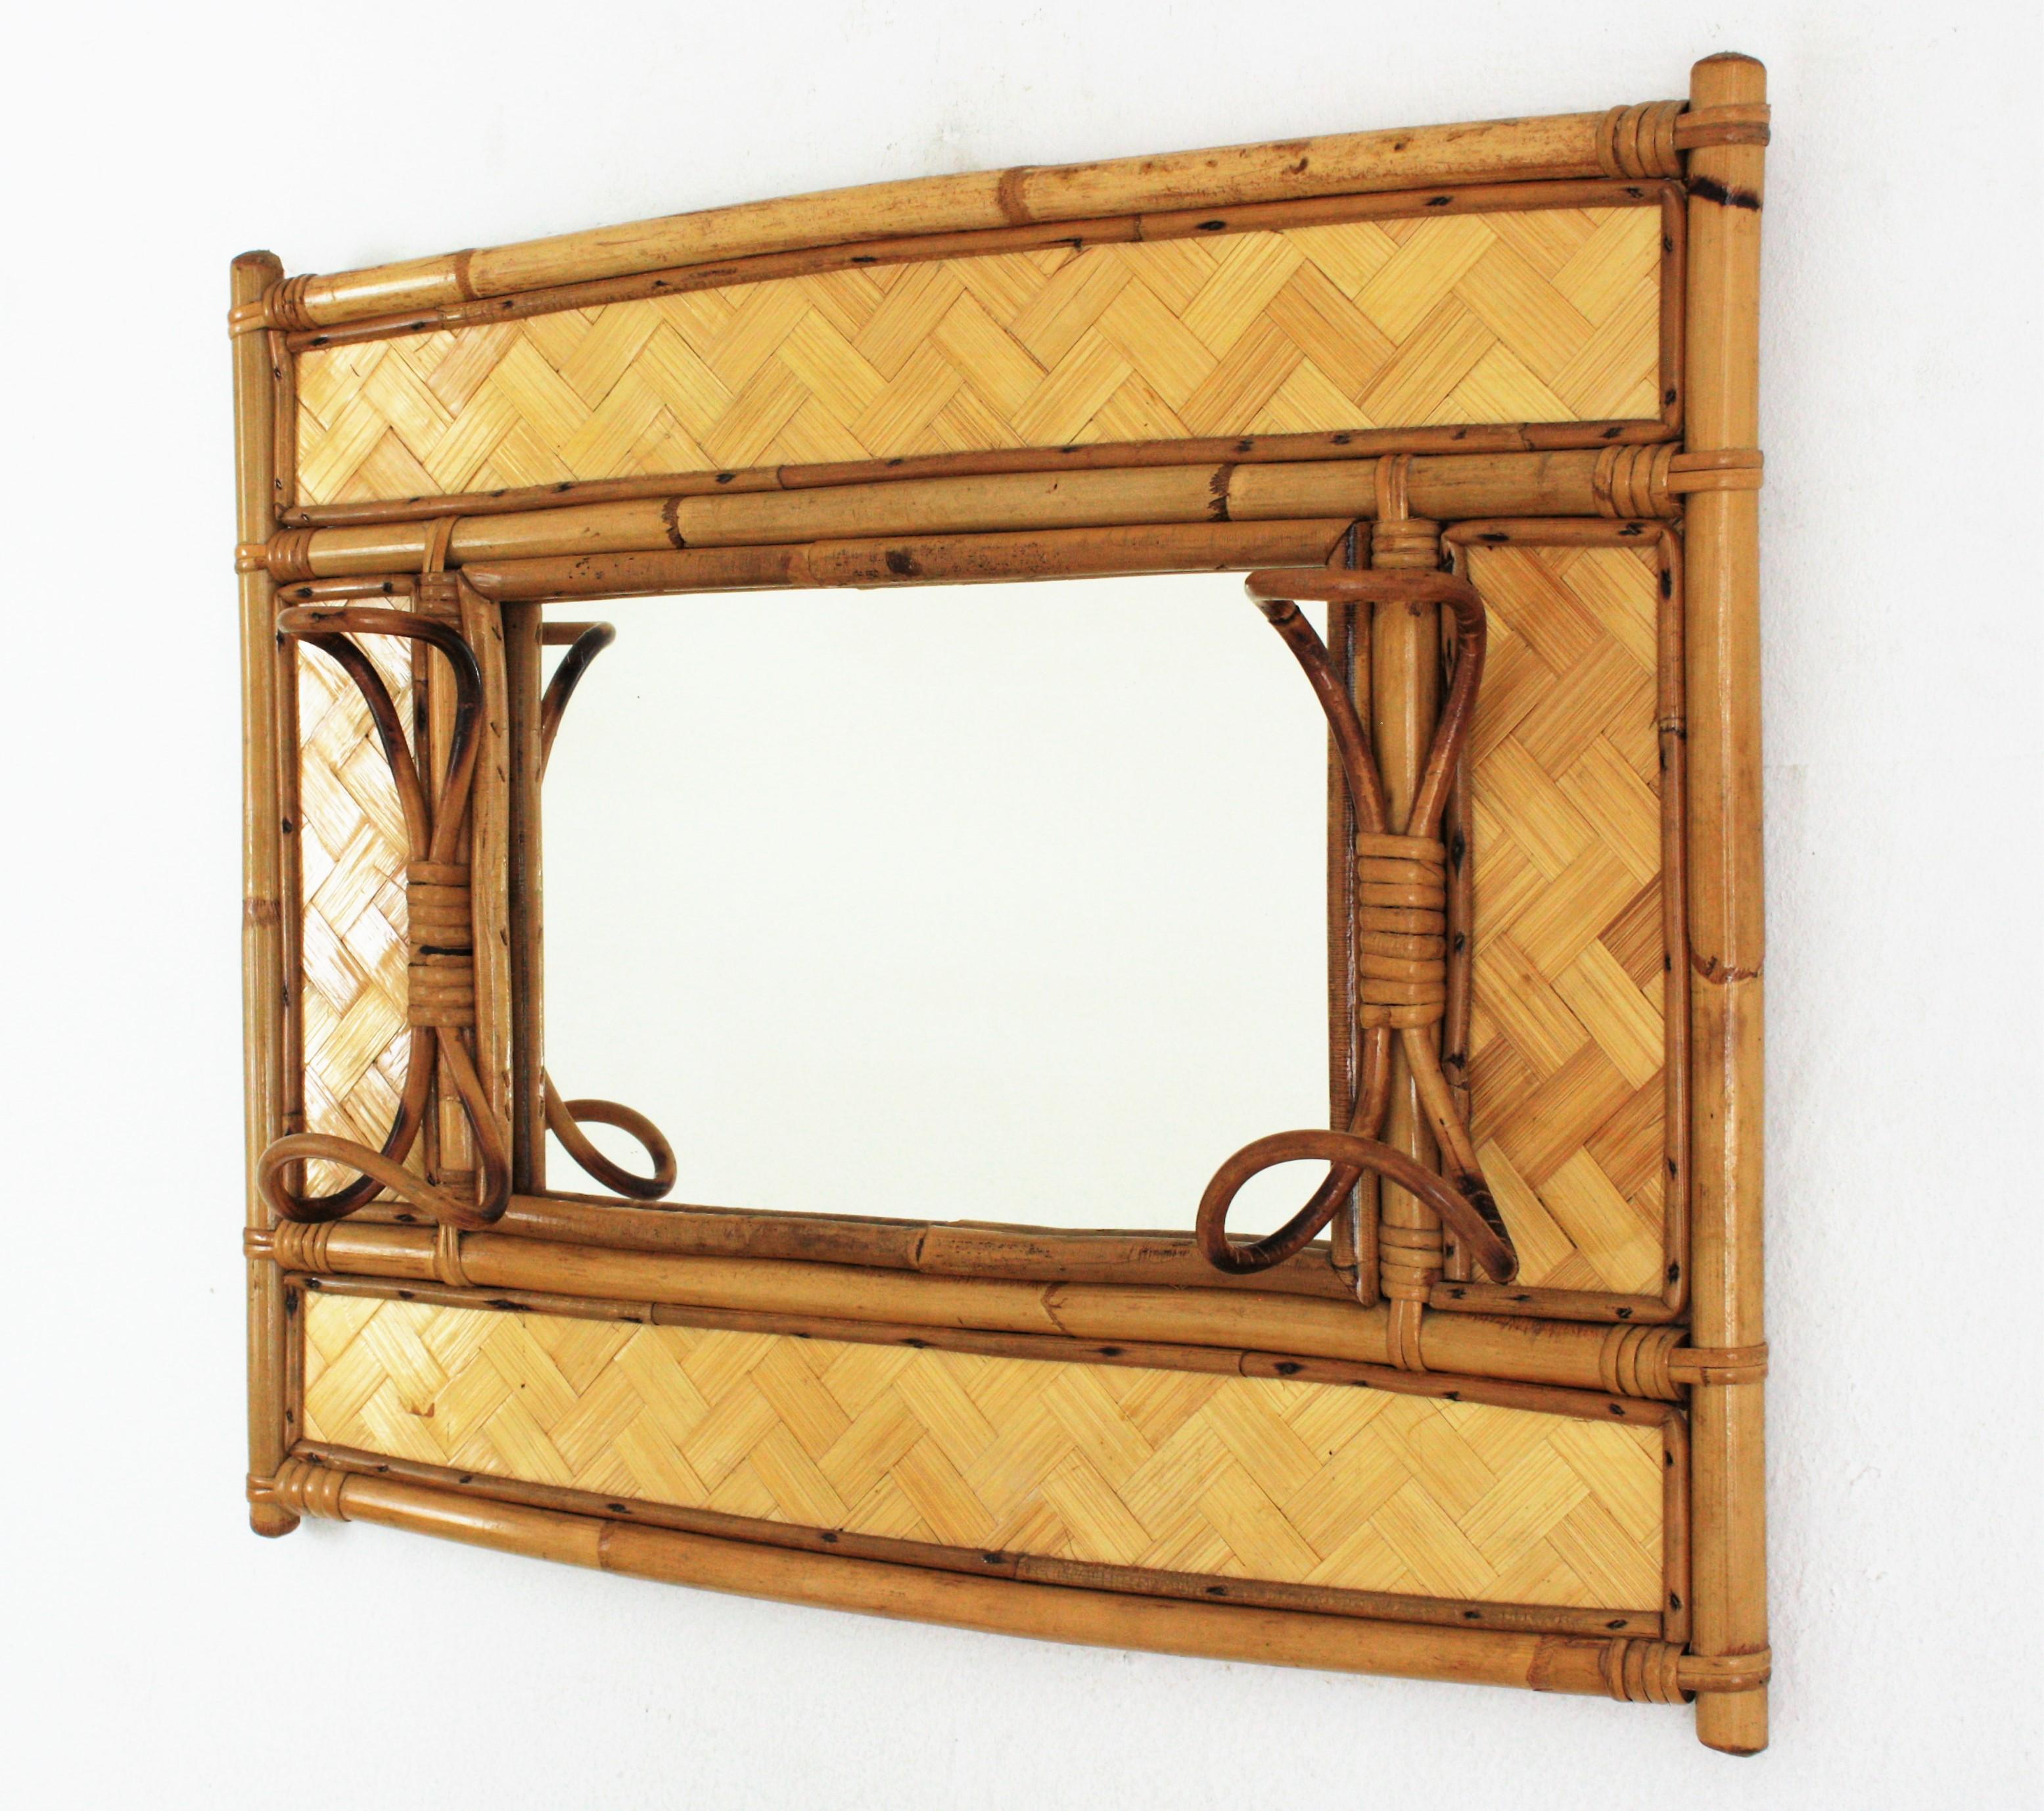 Eye-catching rectangular rattan and bamboo mirror / wall coat rack. Italy, 1960s
This handcrafted mirror was designed in the style of Franco Albini.
It has a cool design with a bamboo structure accented by woven rattan details and two hooks at